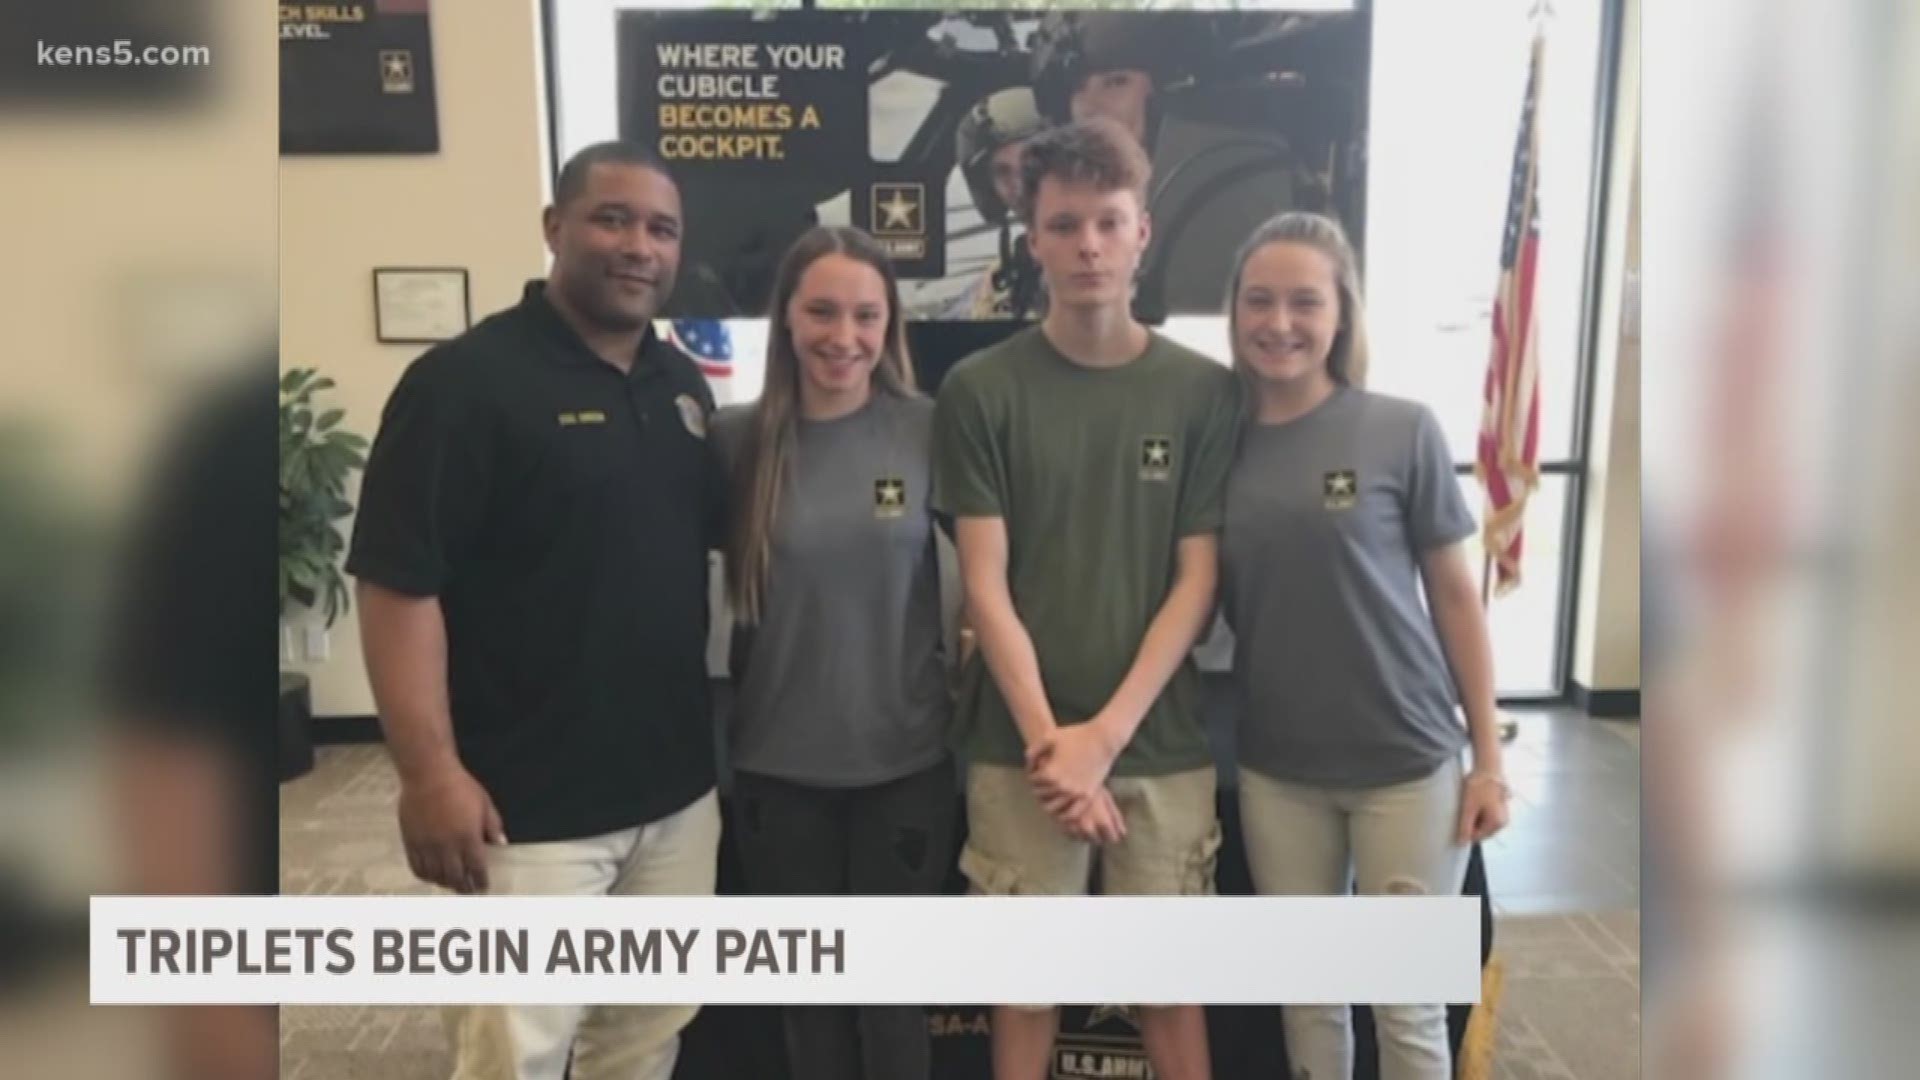 San Antonio triplets are all joining the army. Maddie and Kylee will become automated logistics specialists and Garrett plans to become a human resources specialist.